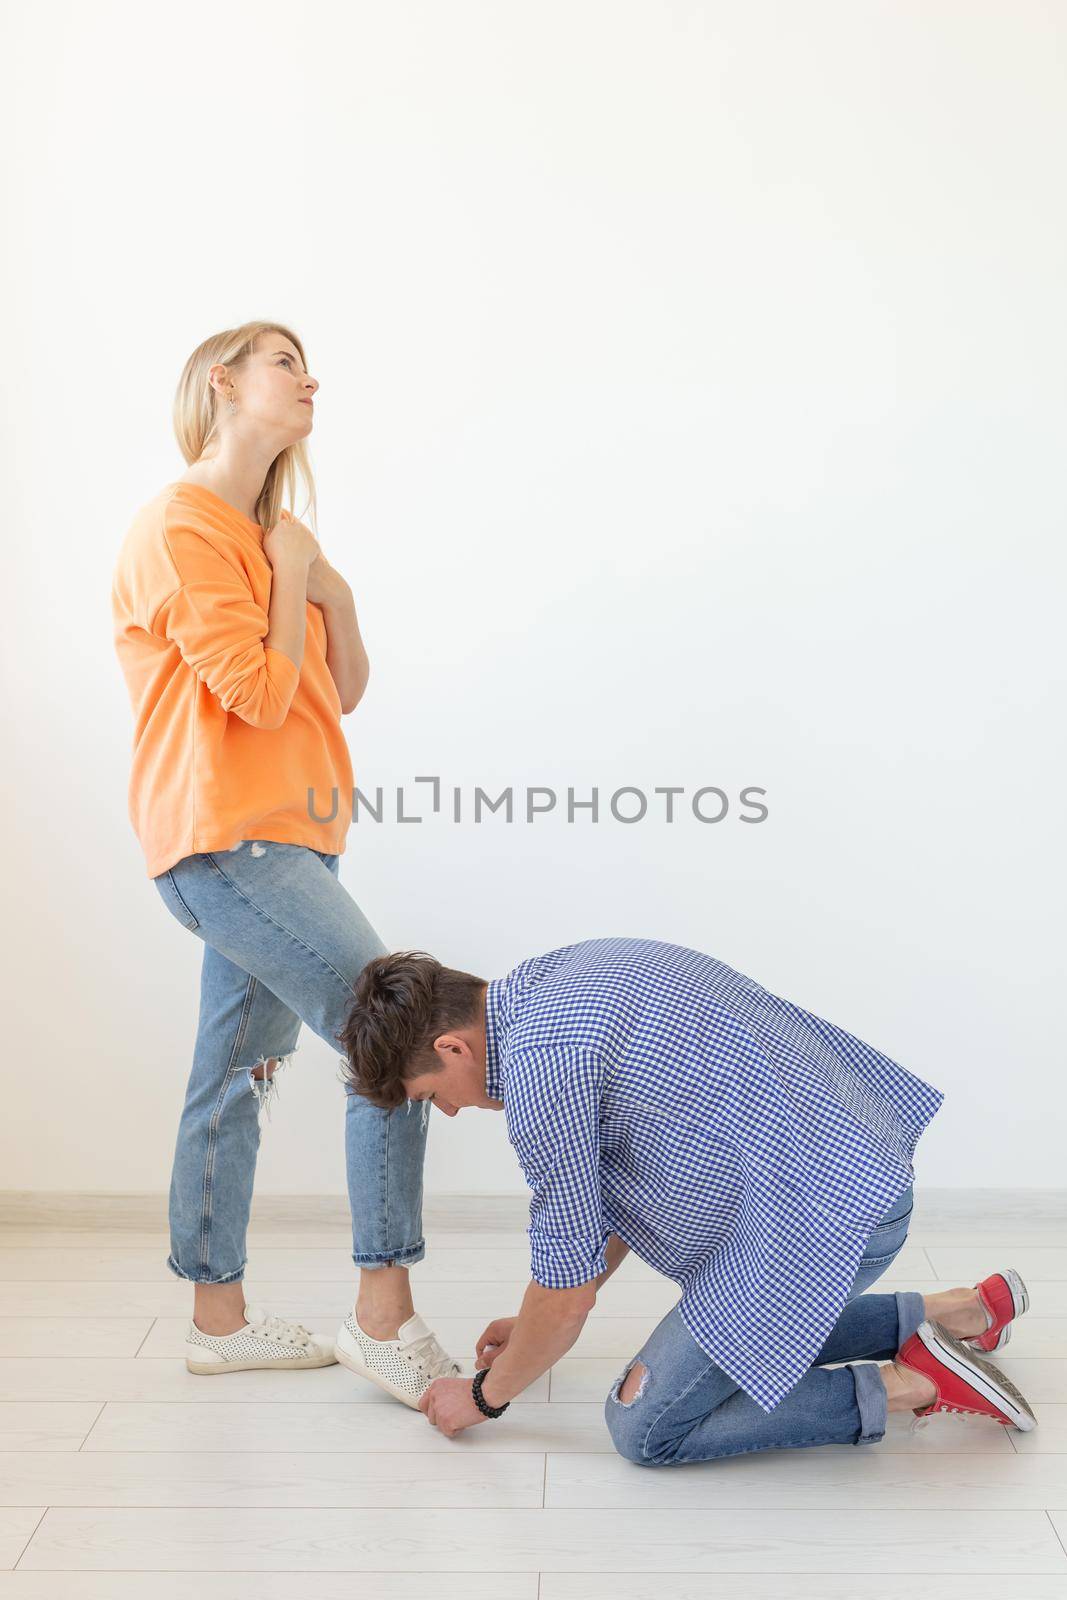 Young man is kneeling and reverently tying shoelaces to his domineering unidentified woman posing on a white background. Concept of dominant relationships. by Satura86